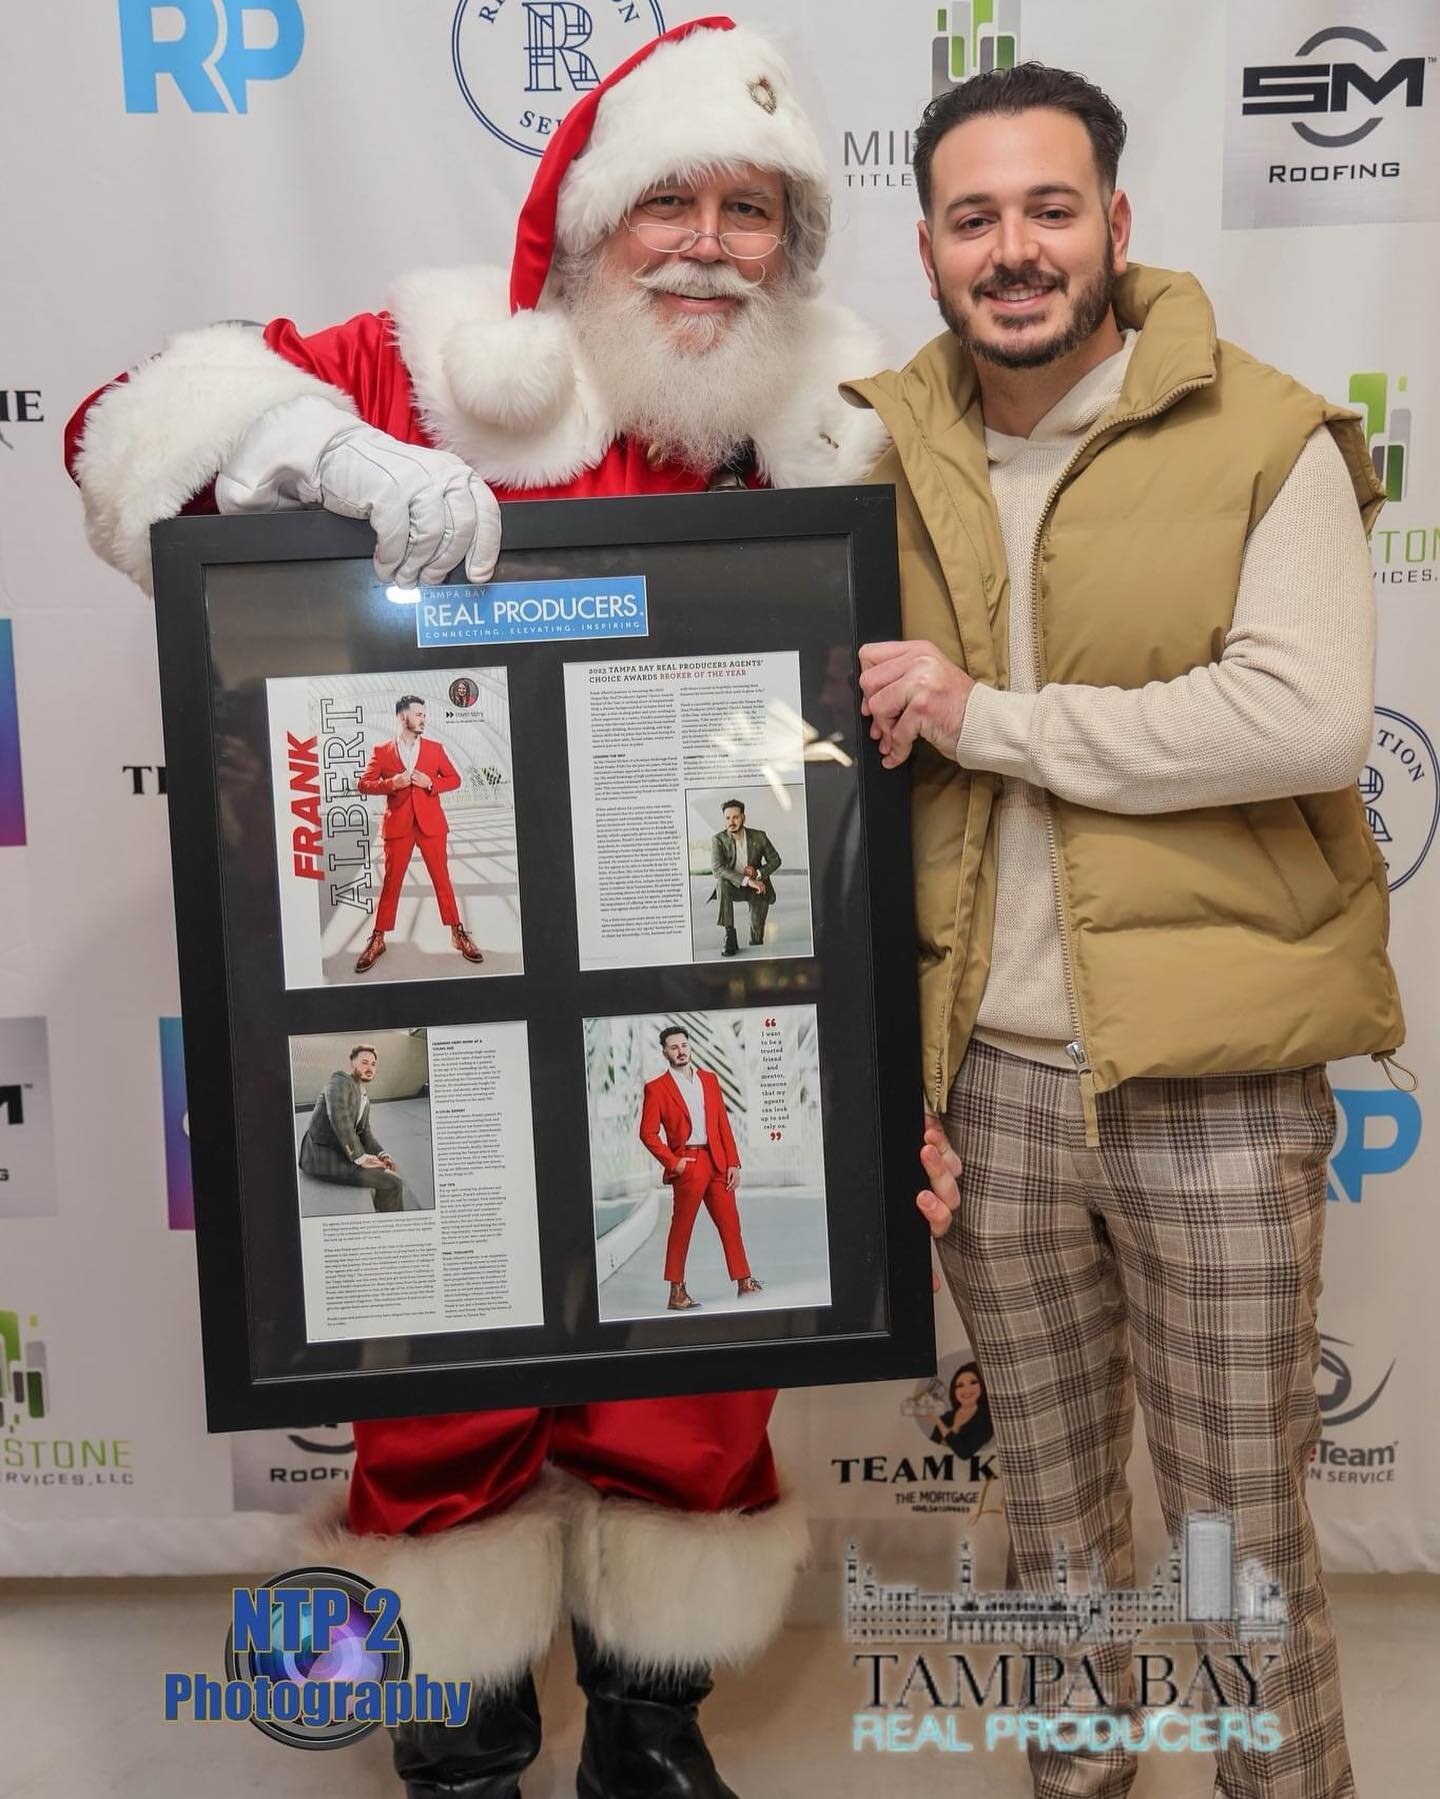 Santa hooked it up this year! As did the @tampabayrealproducers holiday party! Thanks again for the cover and the framed cover is amazing! ❤️🤍❤️🤍
First 3📸 @ntp2photography  and the rest 📸 @jtookthis